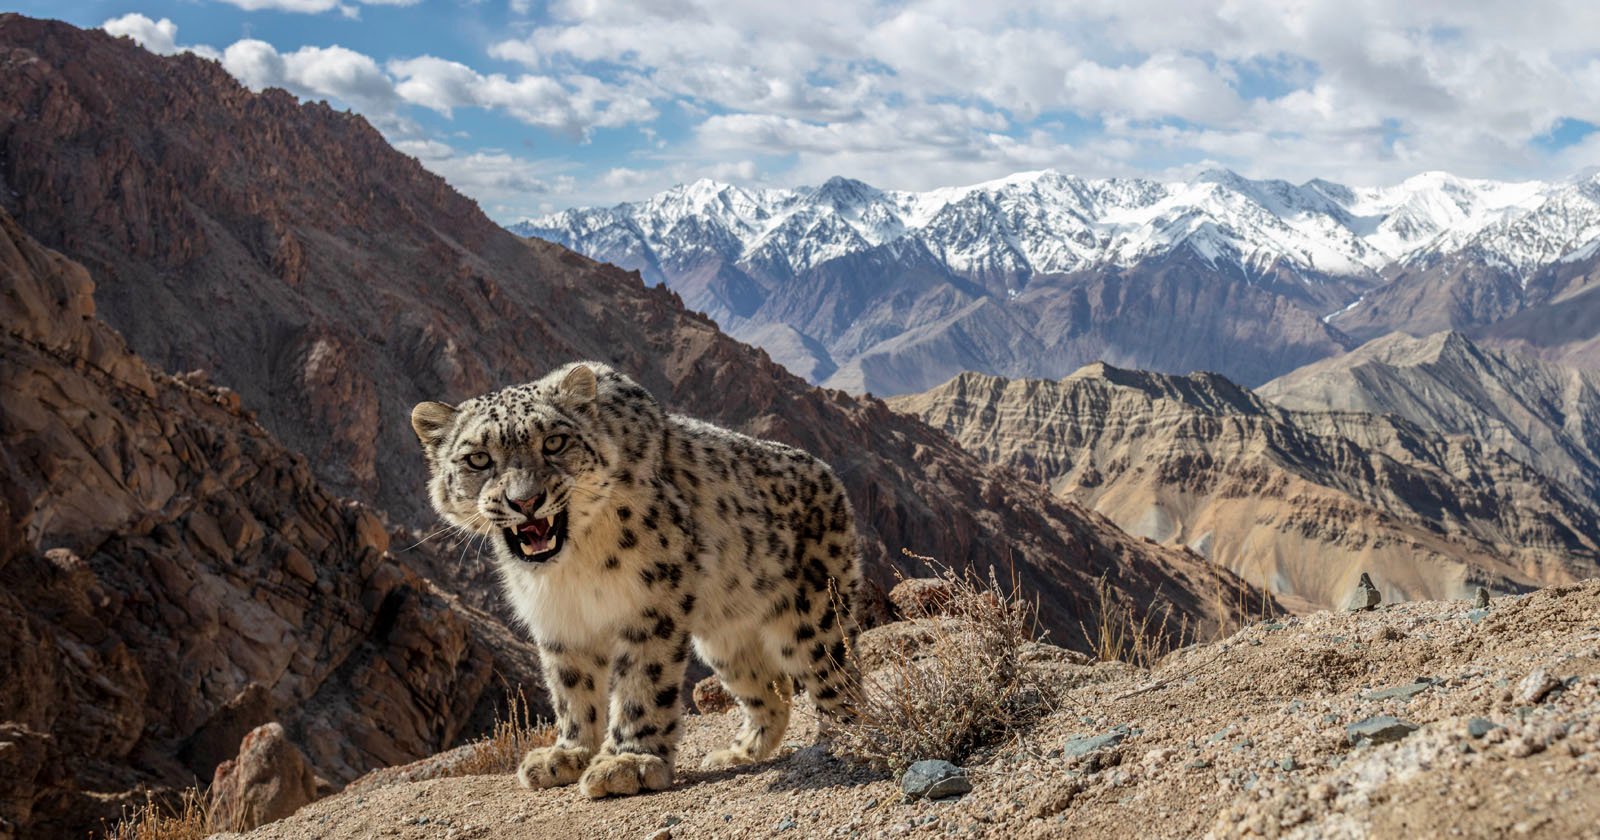 photographer-uses-camera-trap-to-capture-world-s-most-elusive-big-cat